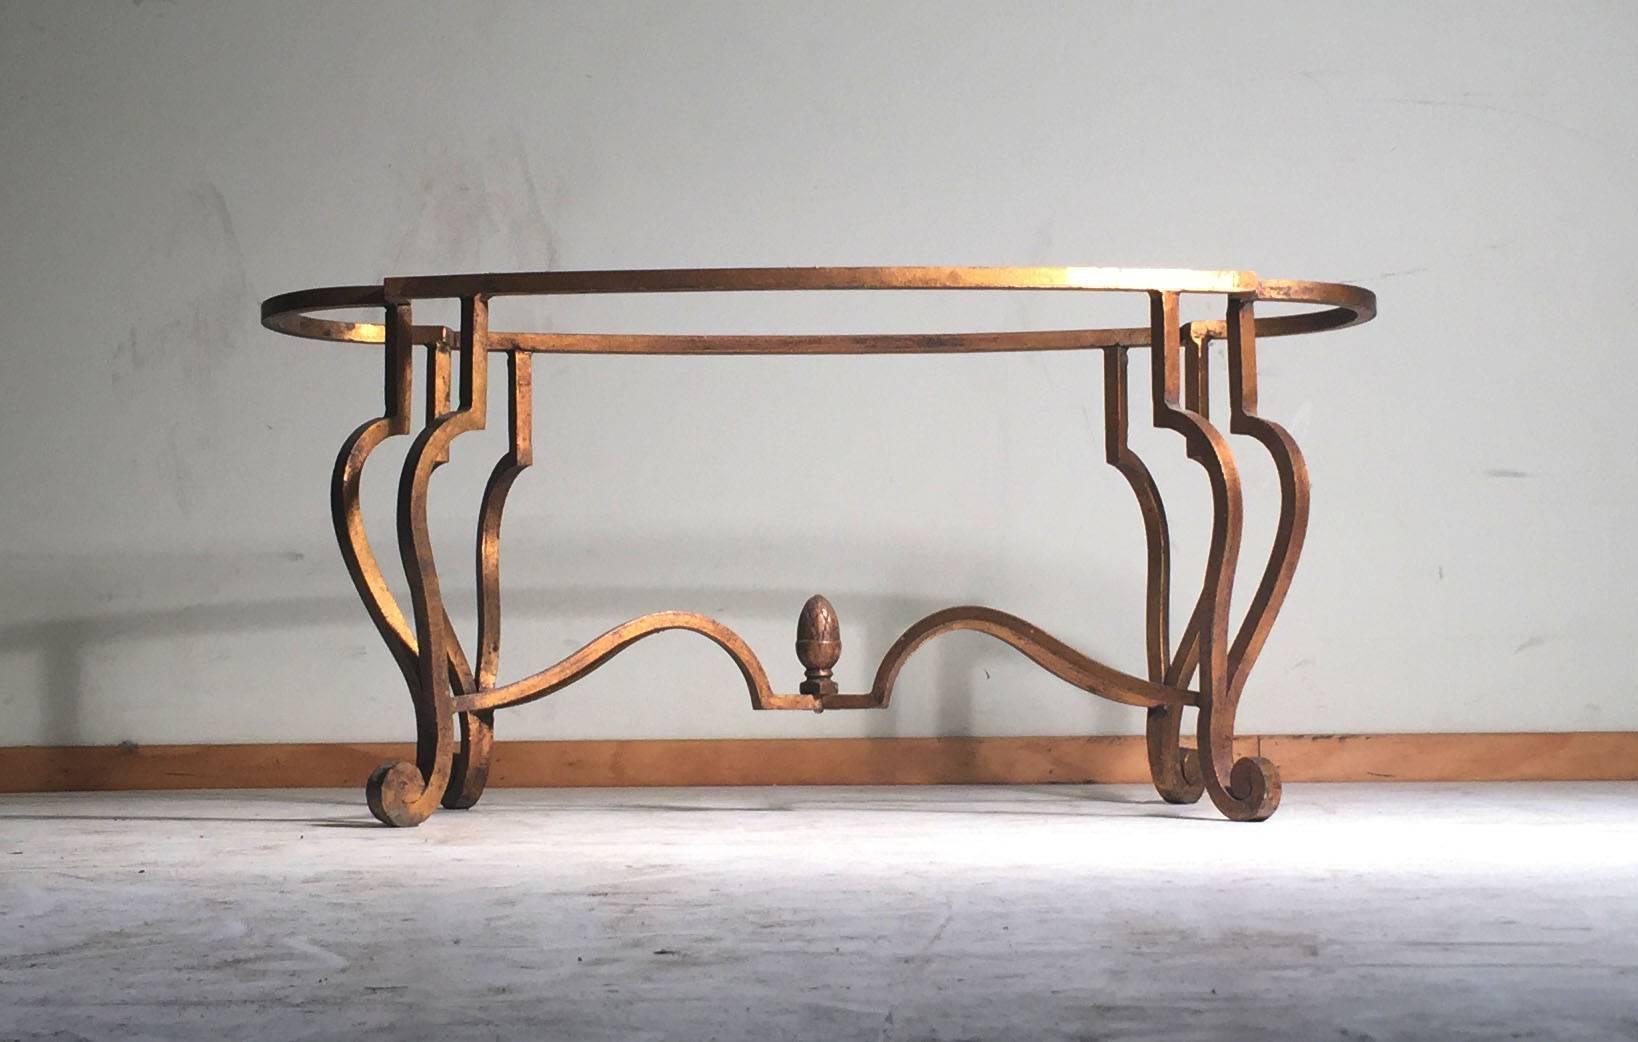 A nice decorative wrought iron coffee table of quality craftsmanship. In the manner of Maison Ramsay and Jean Charles Moreux. No marks or signatures. Possibly from France or Italy. A beautiful proportion and size on this table.

The top frame